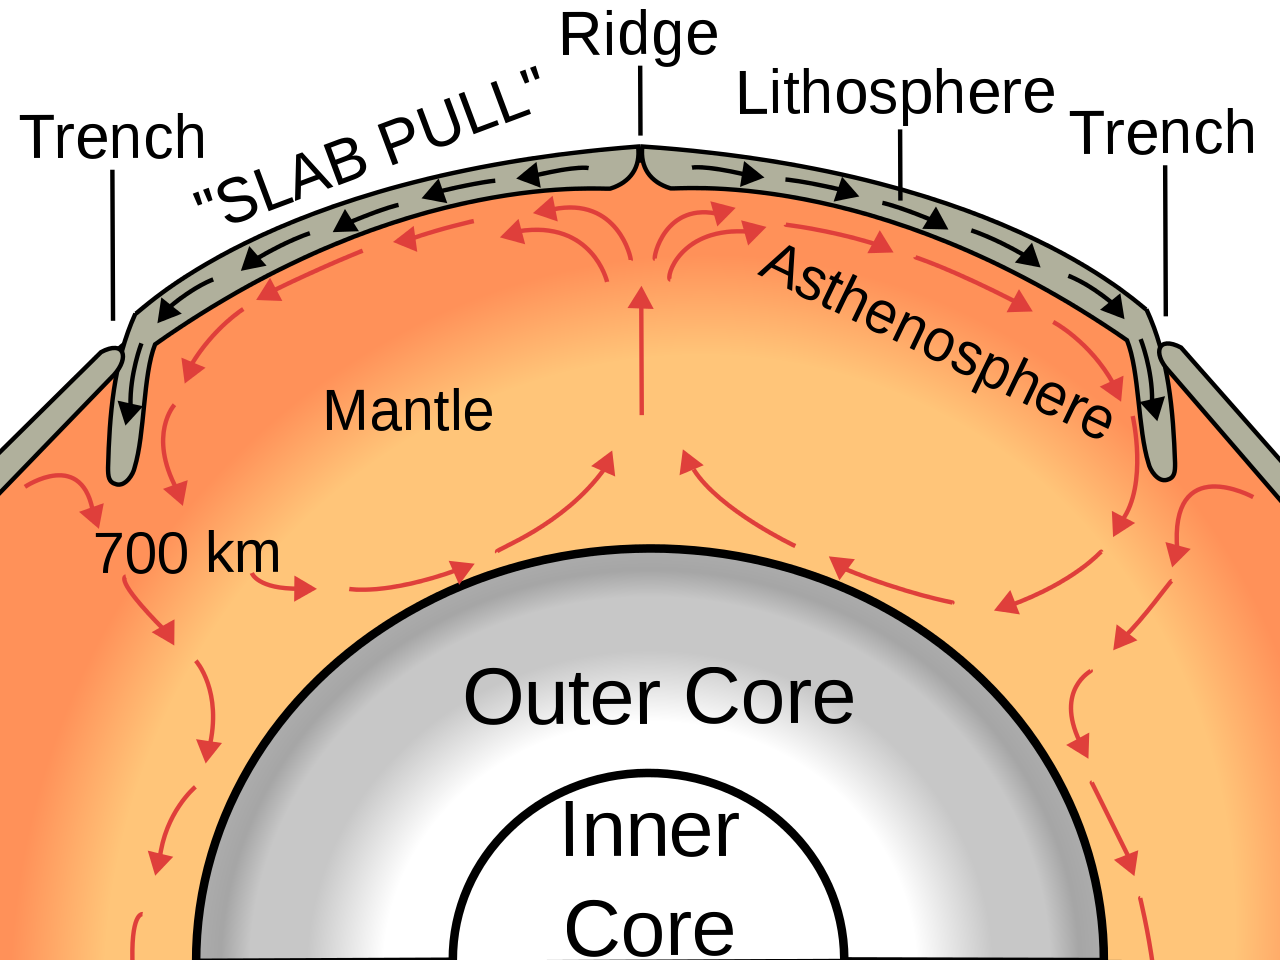 Oceanic crust is formed at an oceanic ridge, while the lithosphere is subducted back into the asthenosphere at trenches. Image Credit: Wikimedia Commons.